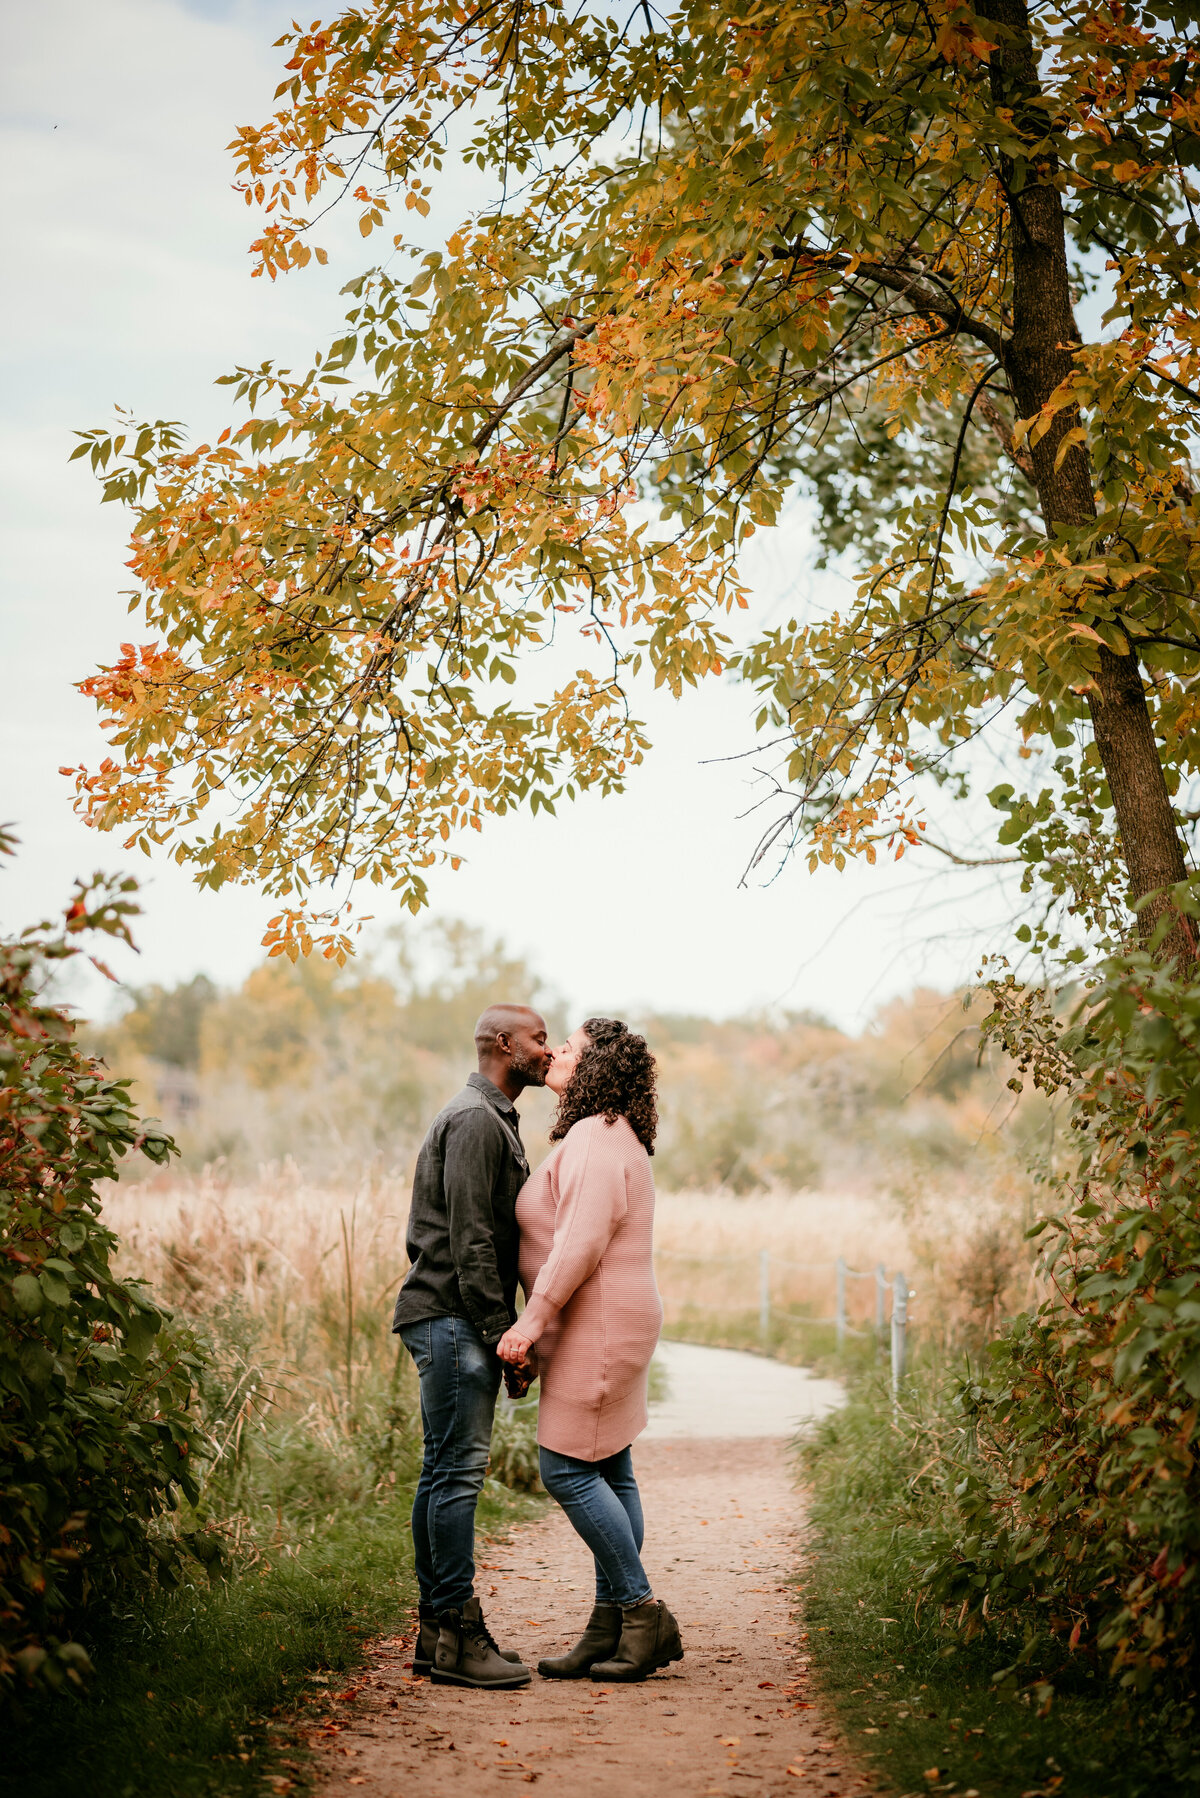 Share trailside tales in your family portraits in St. Paul and Minneapolis. Shannon Kathleen Photography frames your joy against the winding paths of wooded trails. Book now for trailside memories.